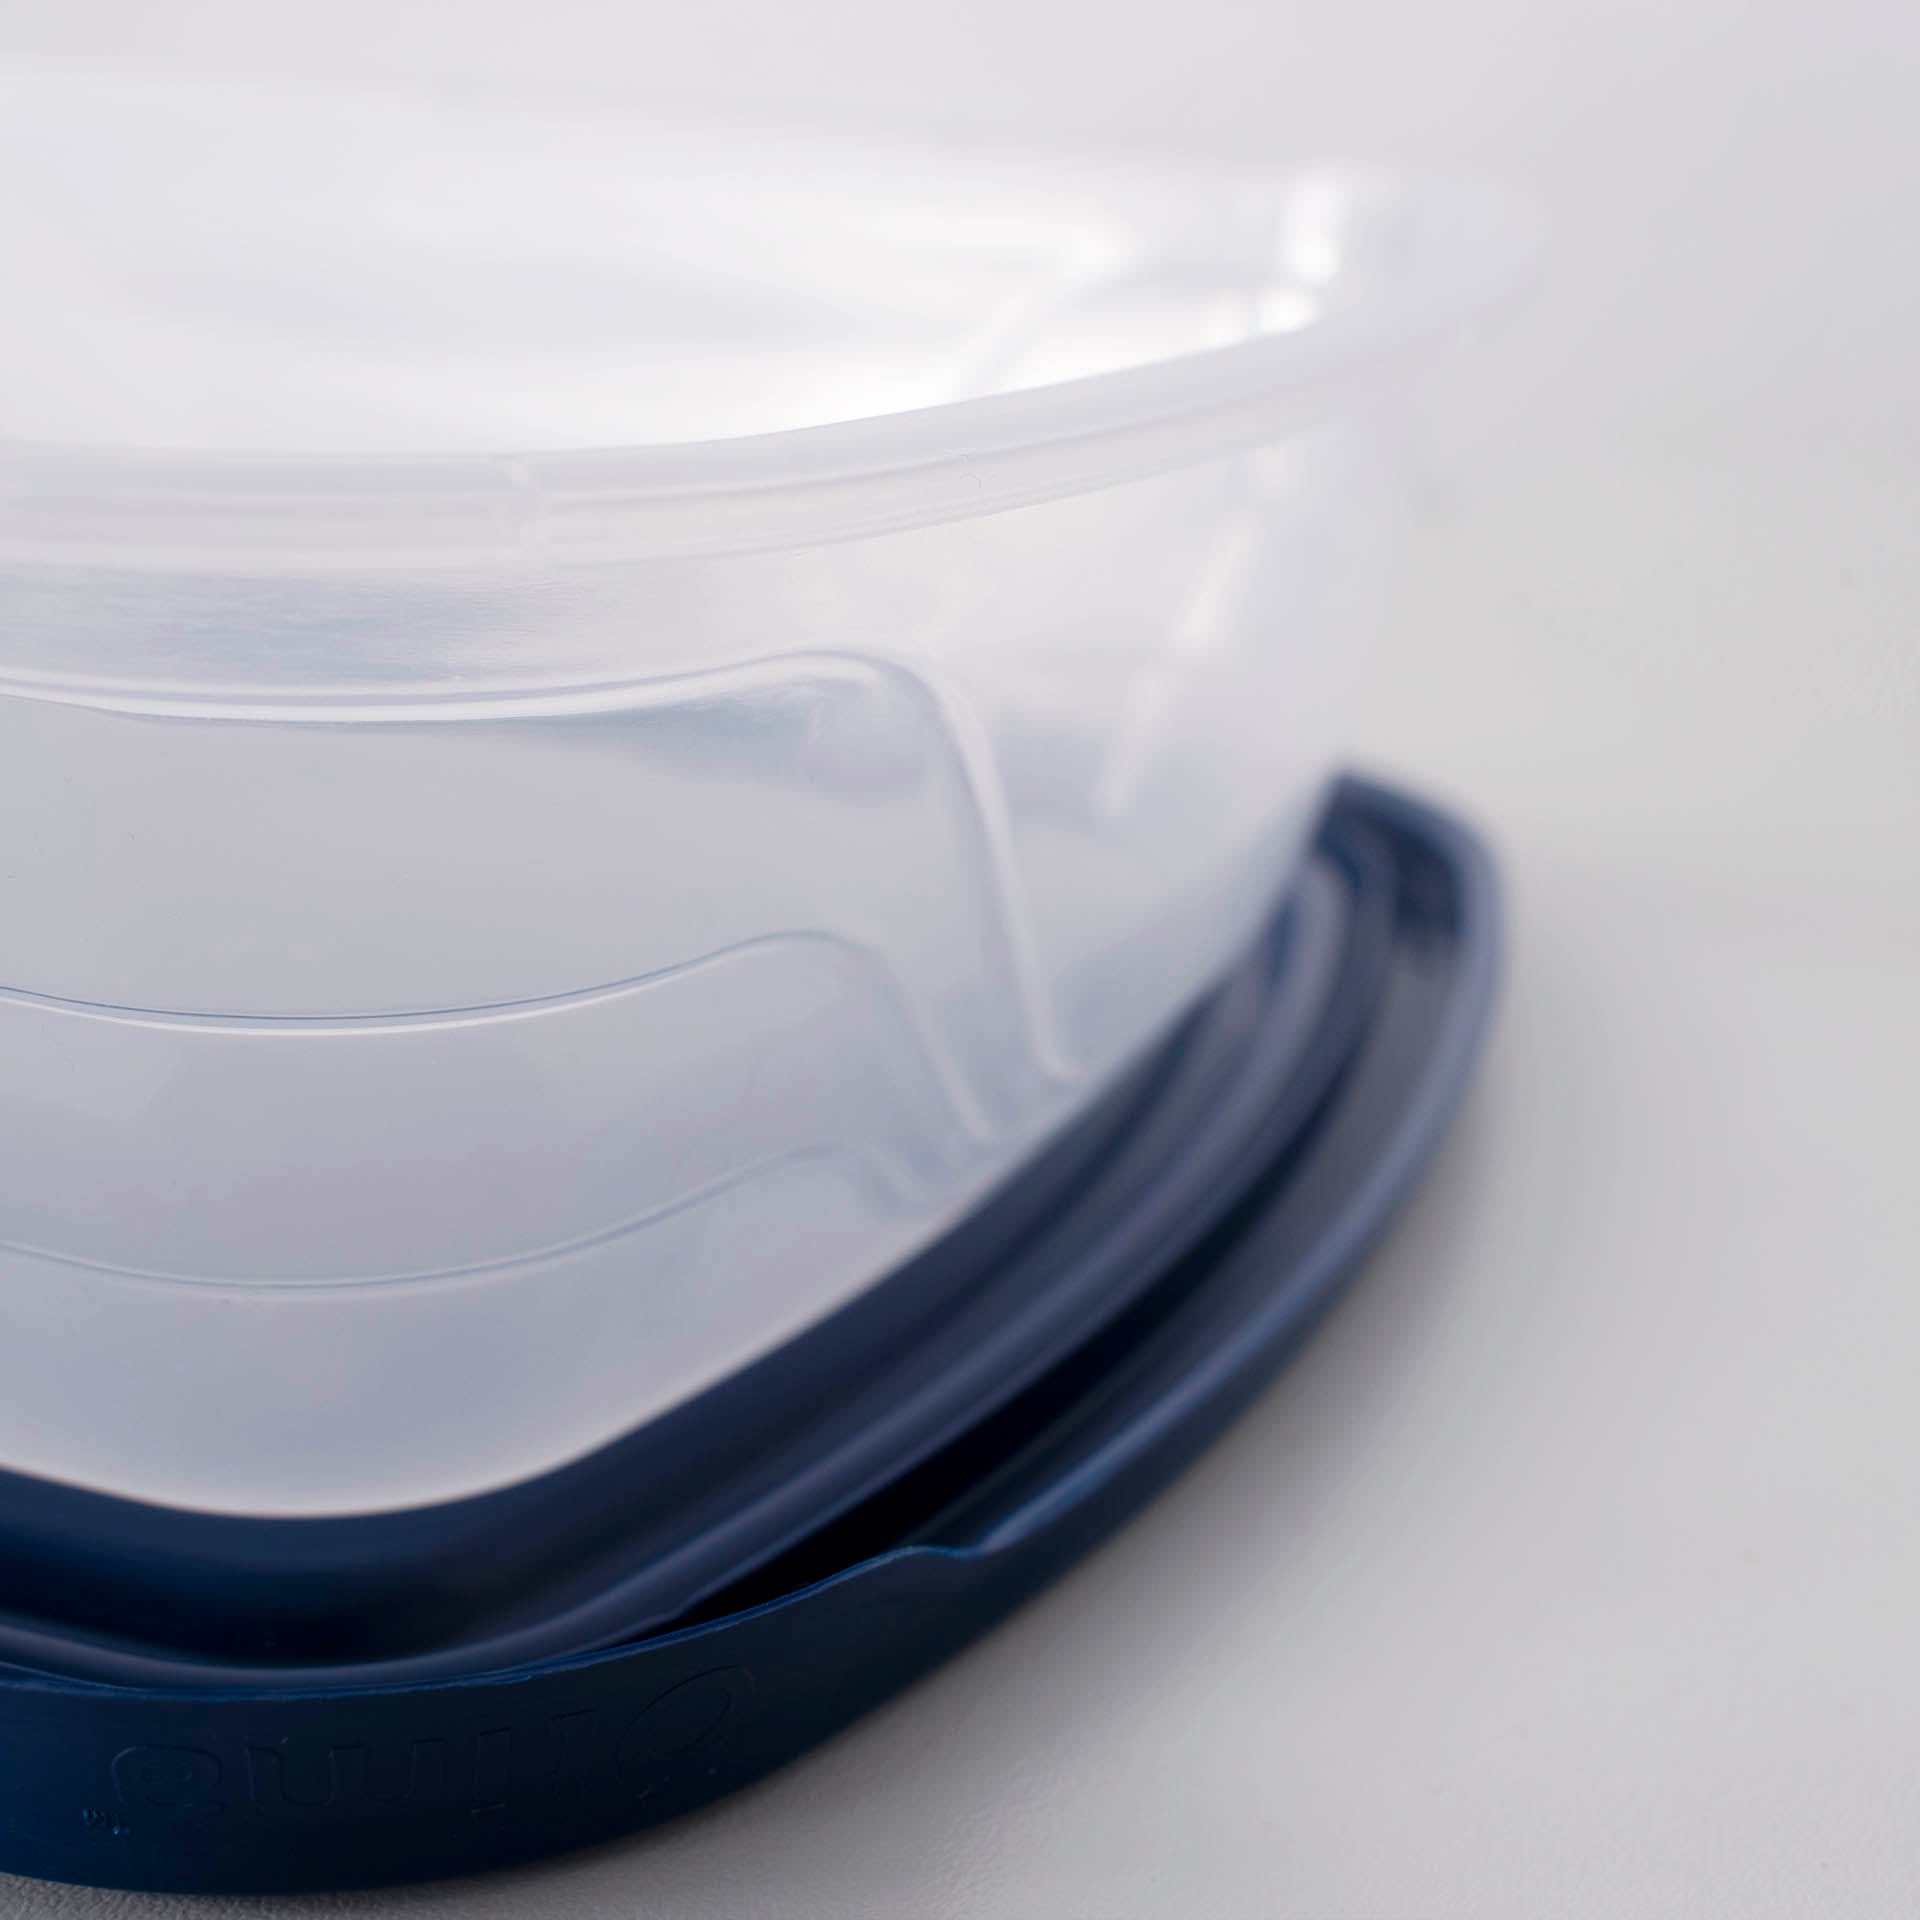 Otima Snap-It Lunch Box Container 2.2L